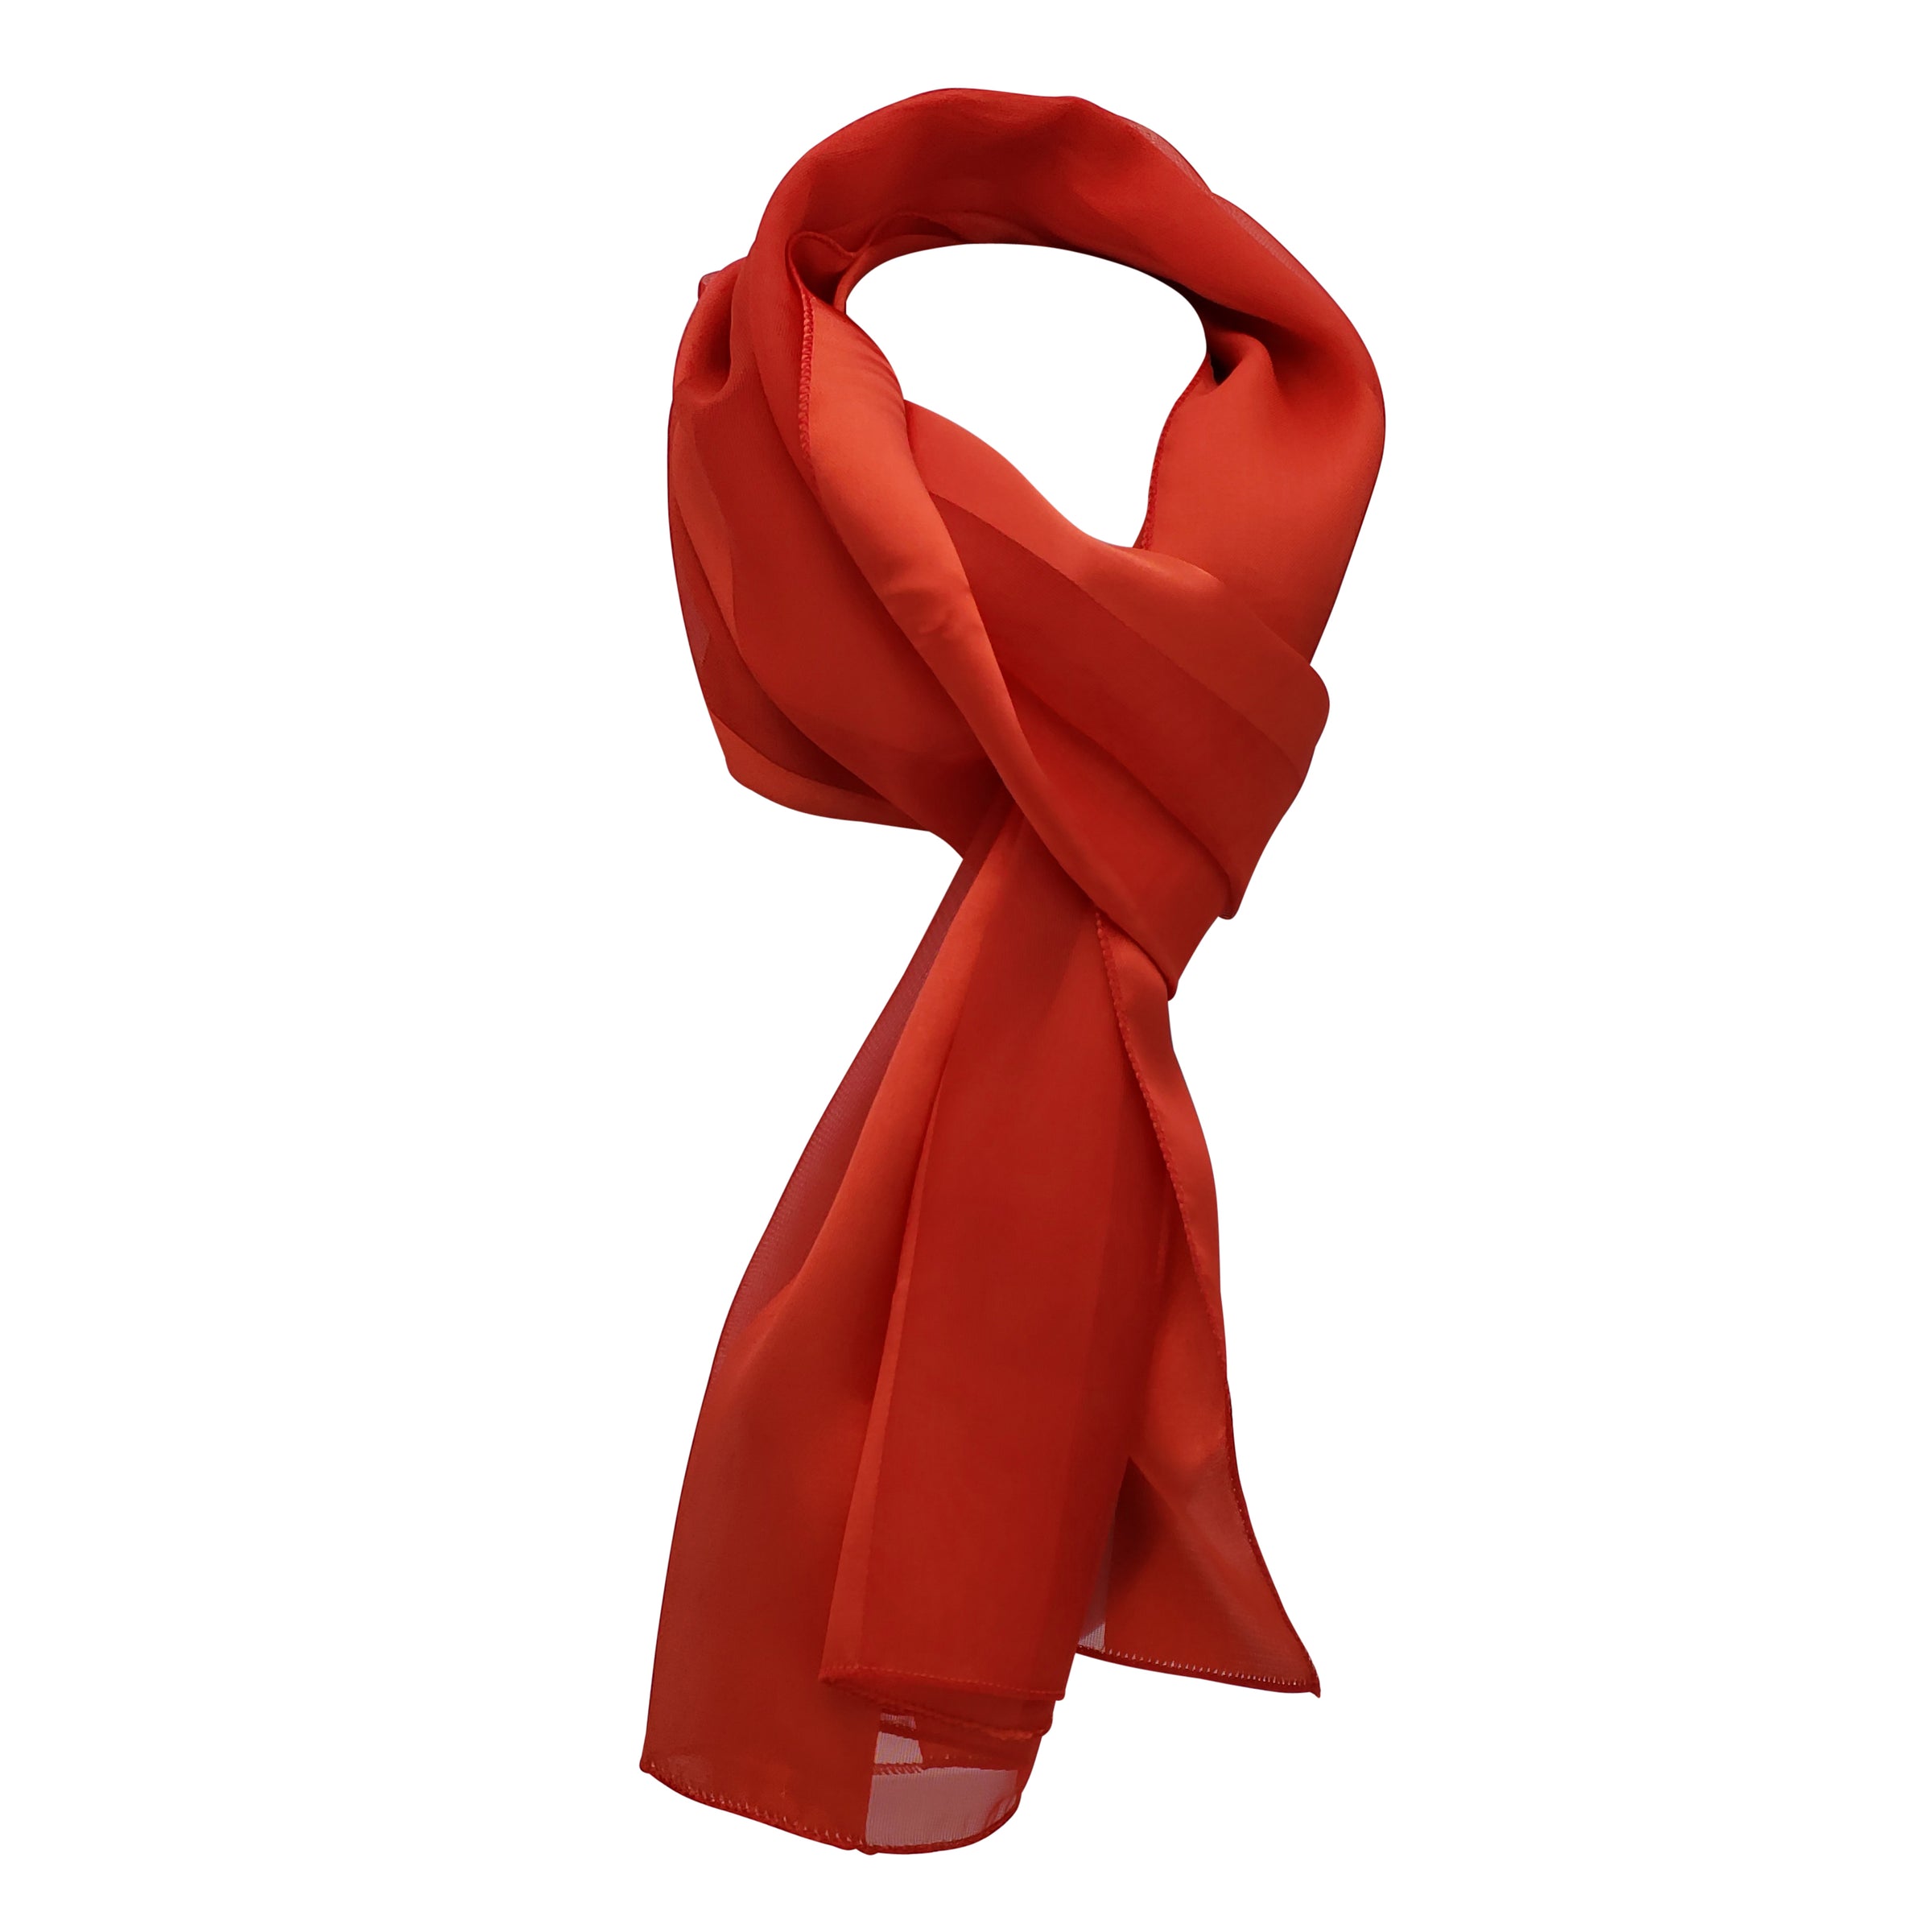 Stylish And Colorful Lightweight Satin Stripe Fashion Scarf, 60" (Red)